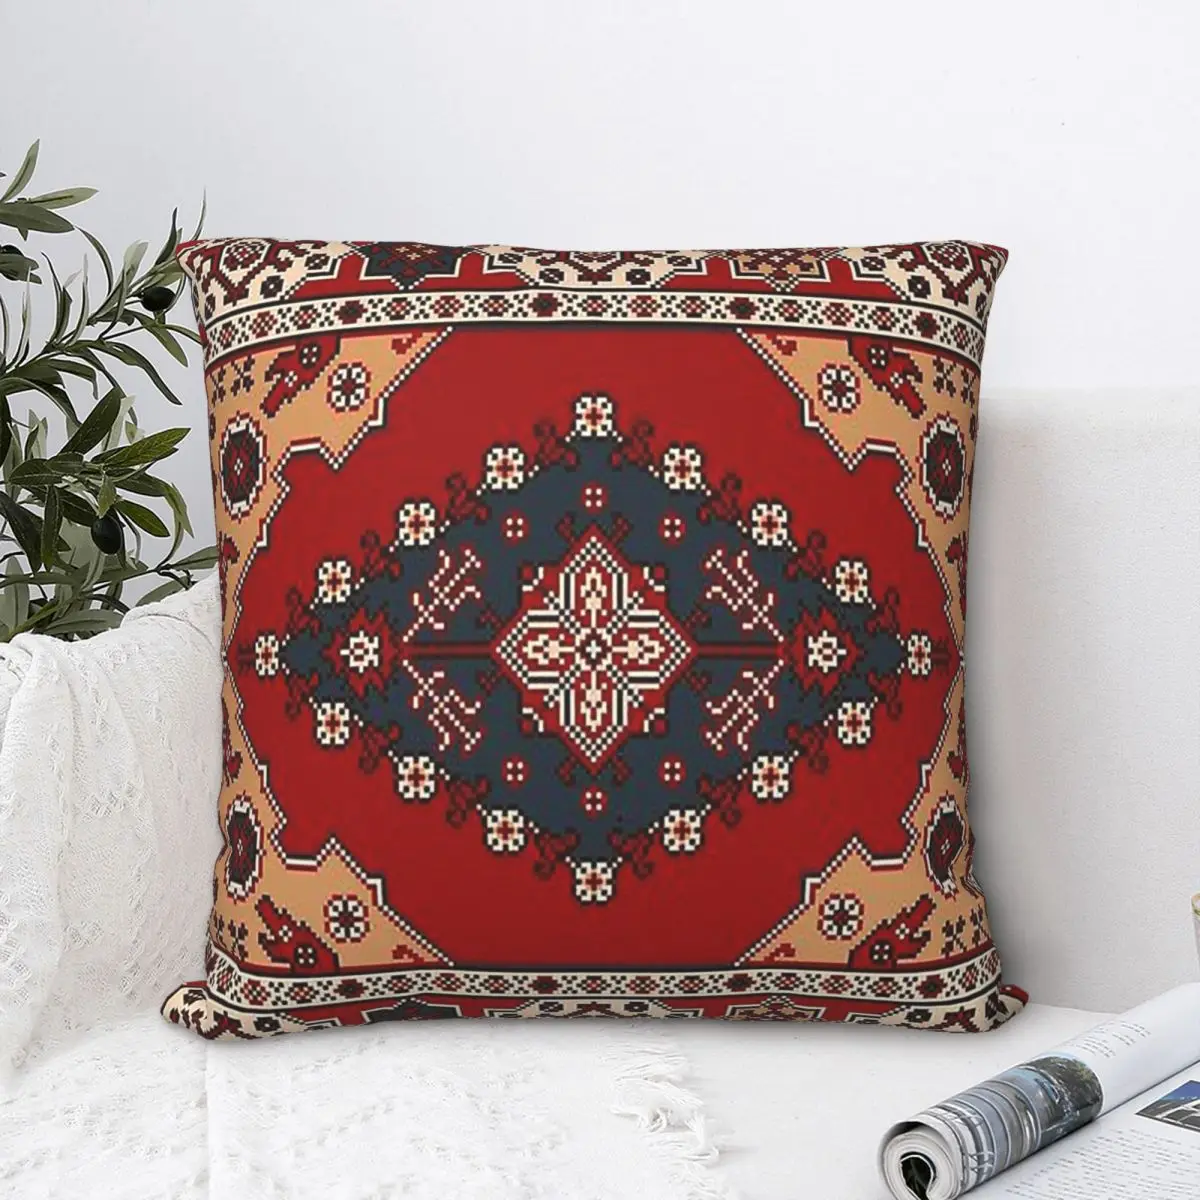 

Red Design Hug Pillowcase Oriental Rug Backpack Cushion Livingroom DIY Printed Office Coussin Covers Decorative